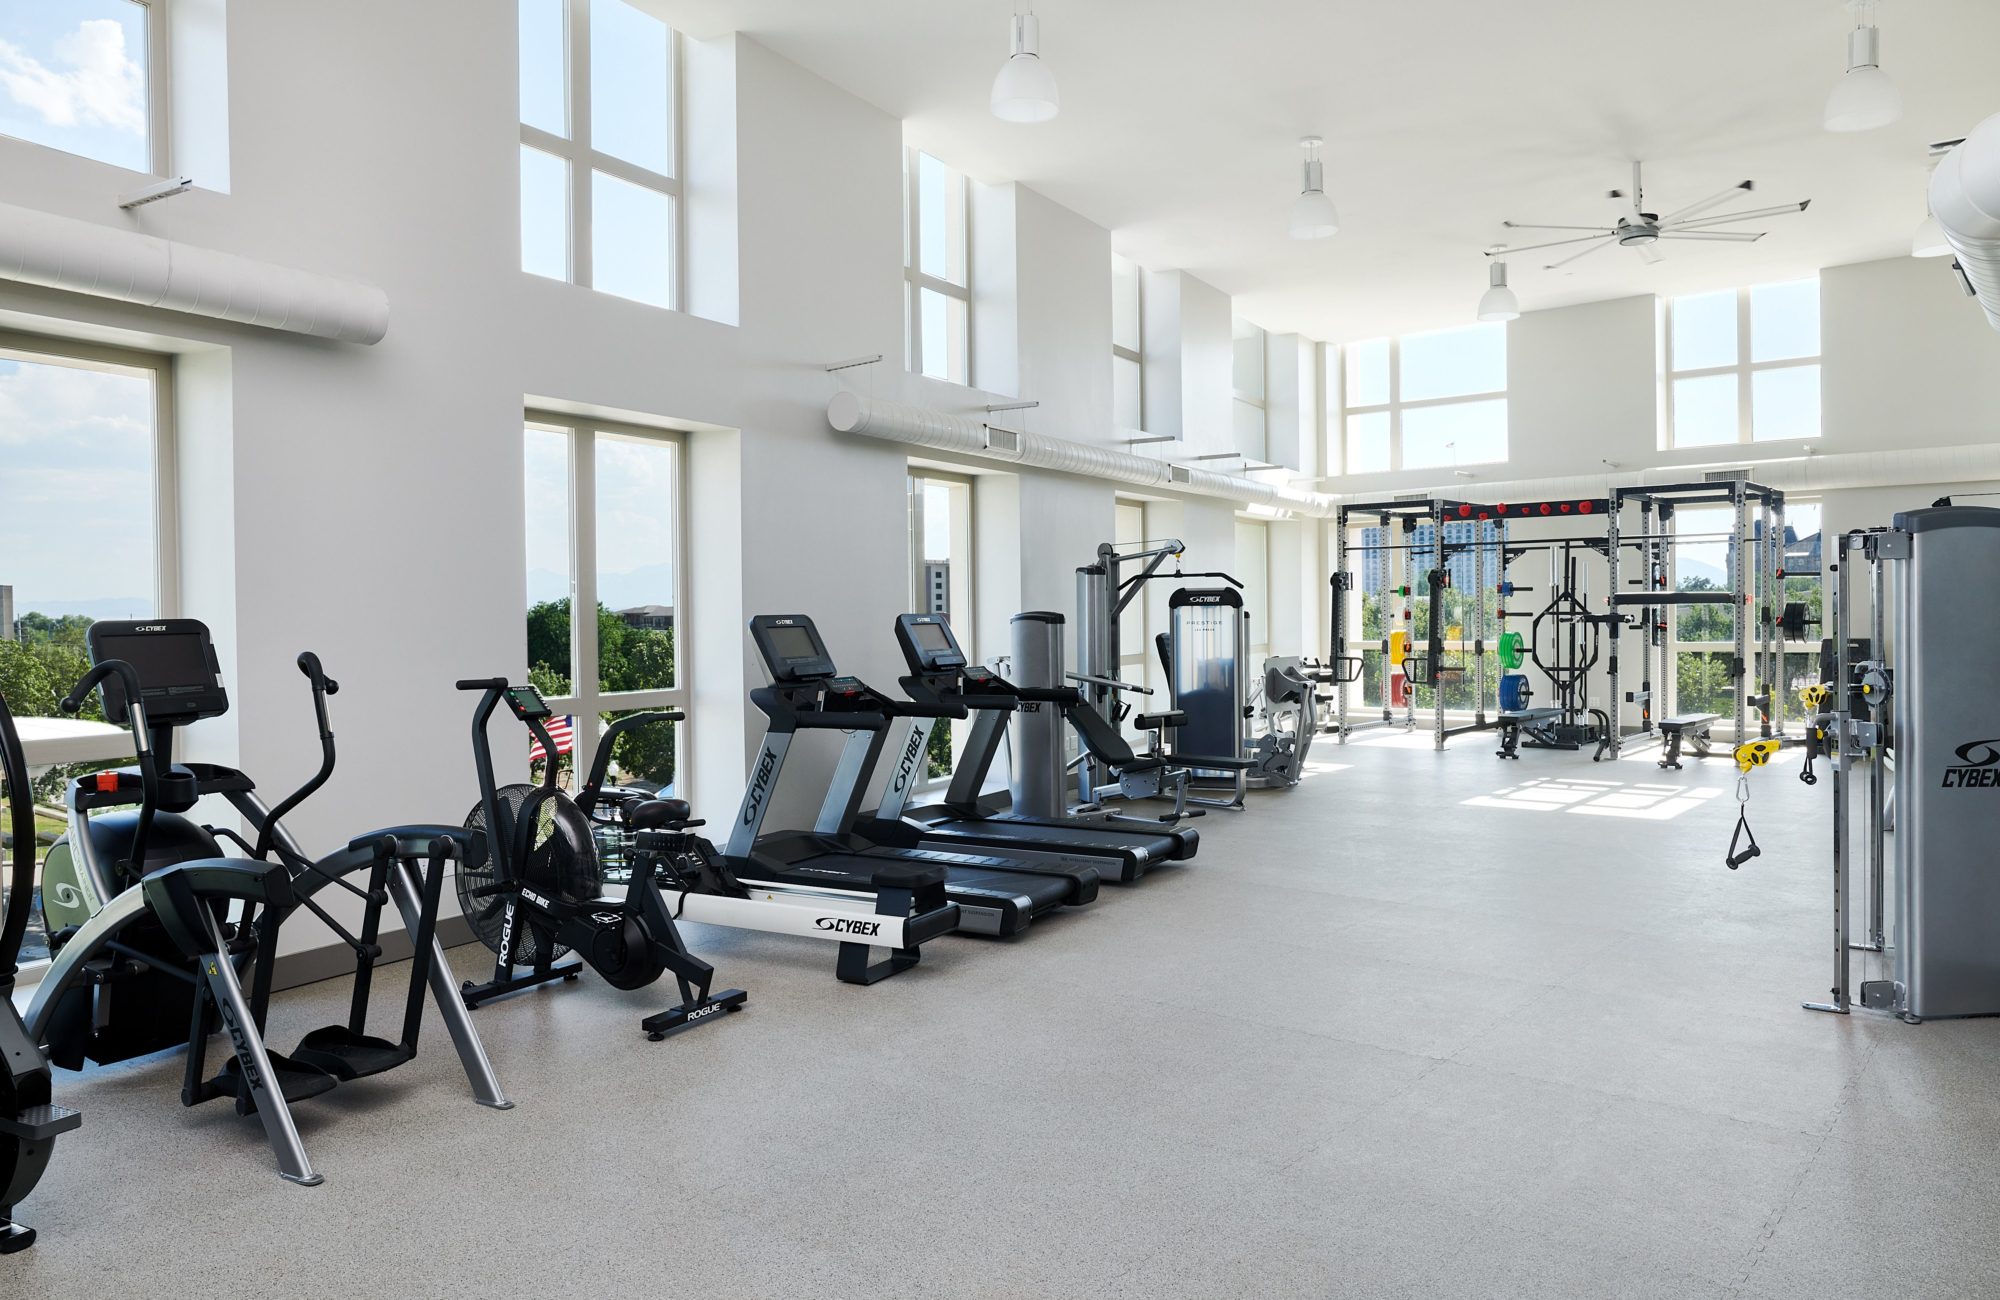 Spacious fitness center with bright lighting and fully stocked weights and cardio machines at Avia apartments in Salt Lake City